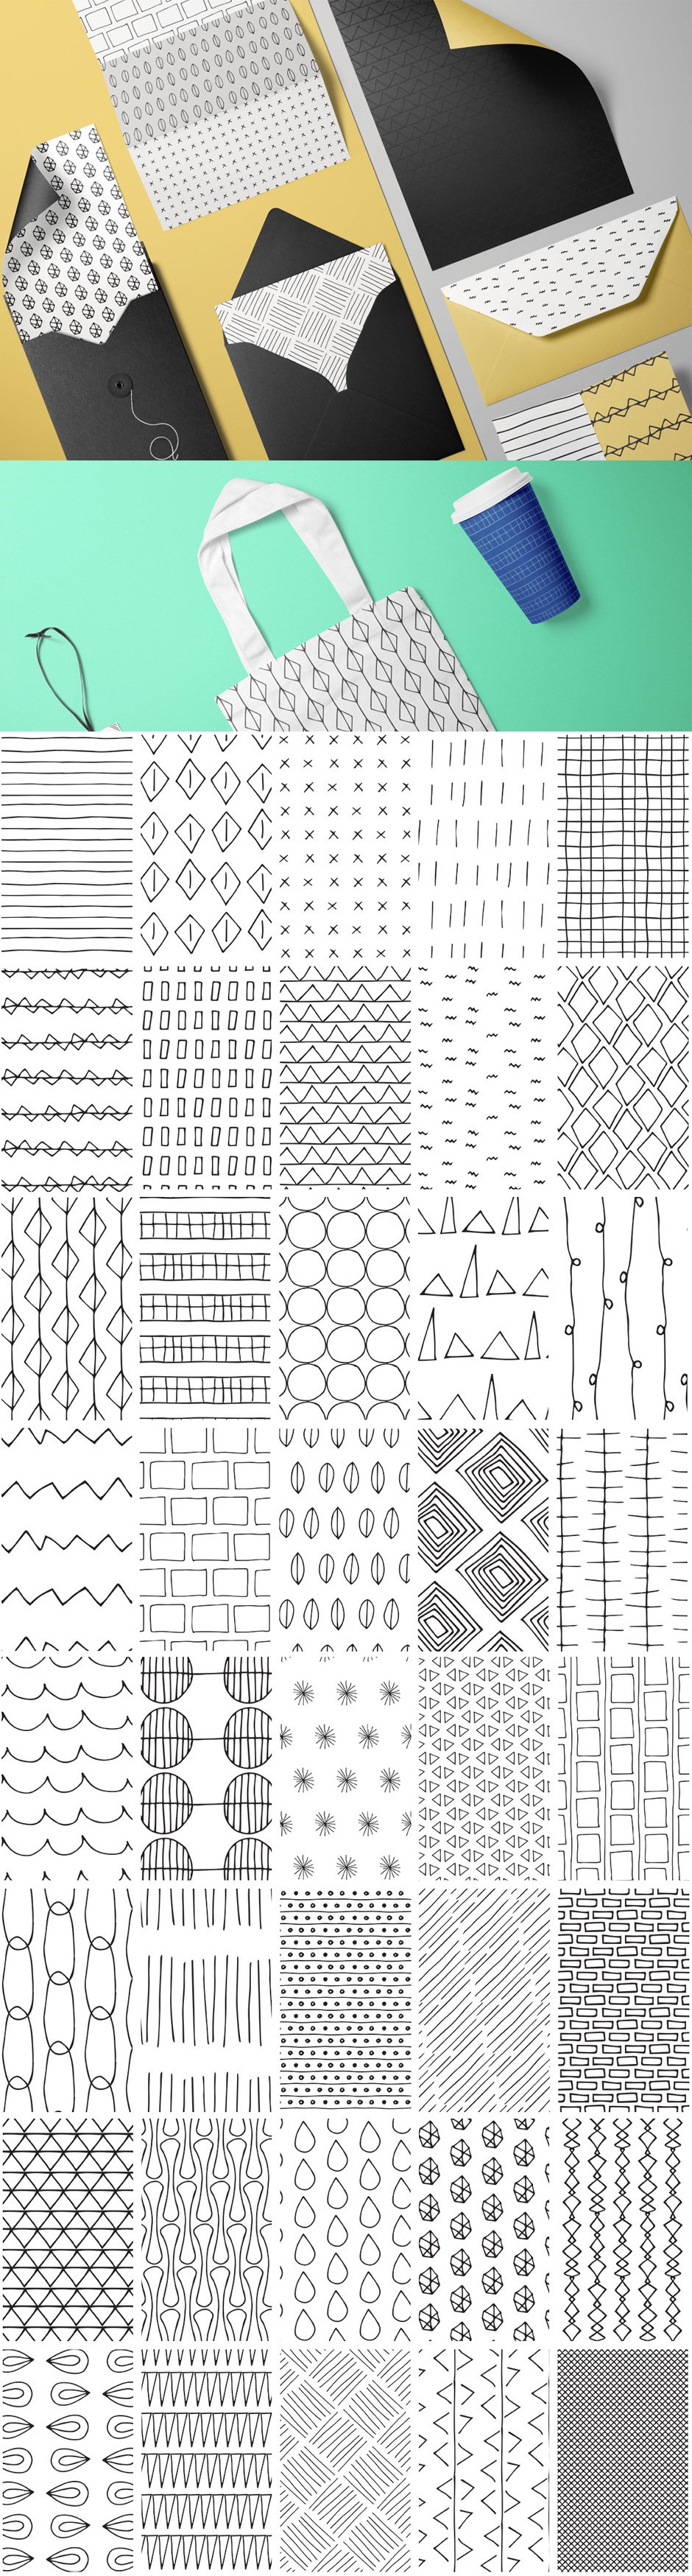 Simple Line Hand-drawn Patterns